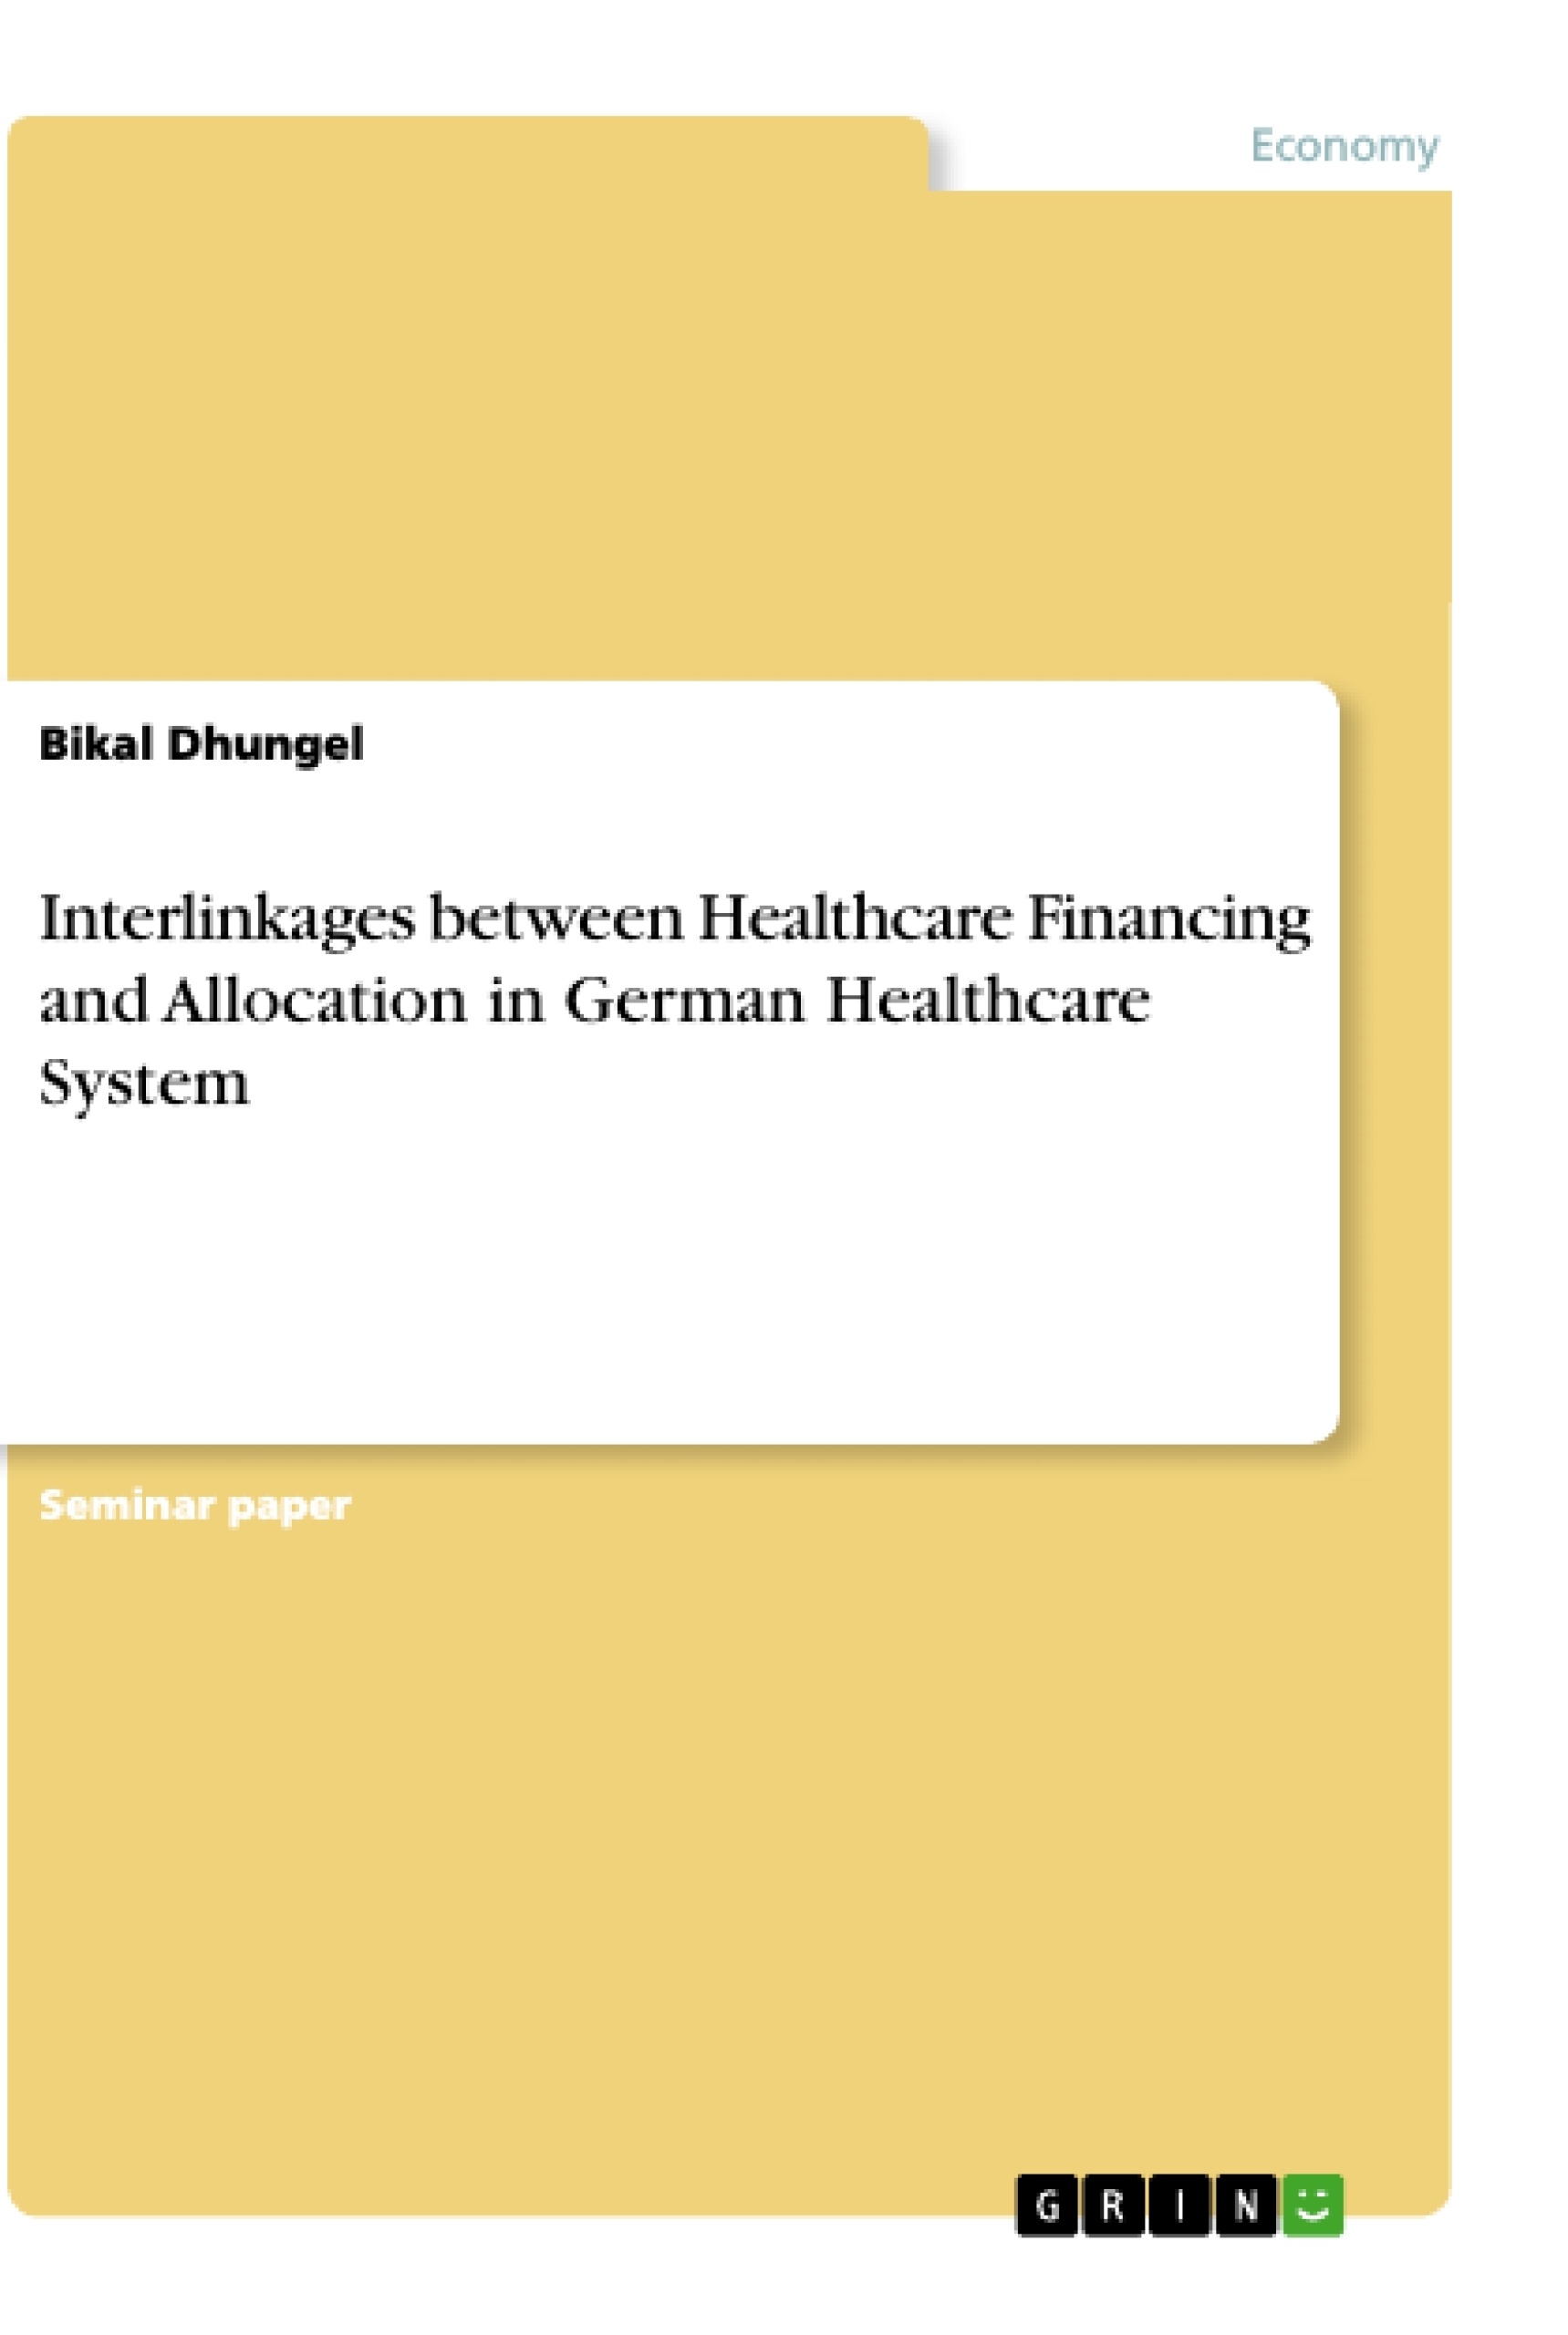 Title: Interlinkages between Healthcare Financing and Allocation in German Healthcare System